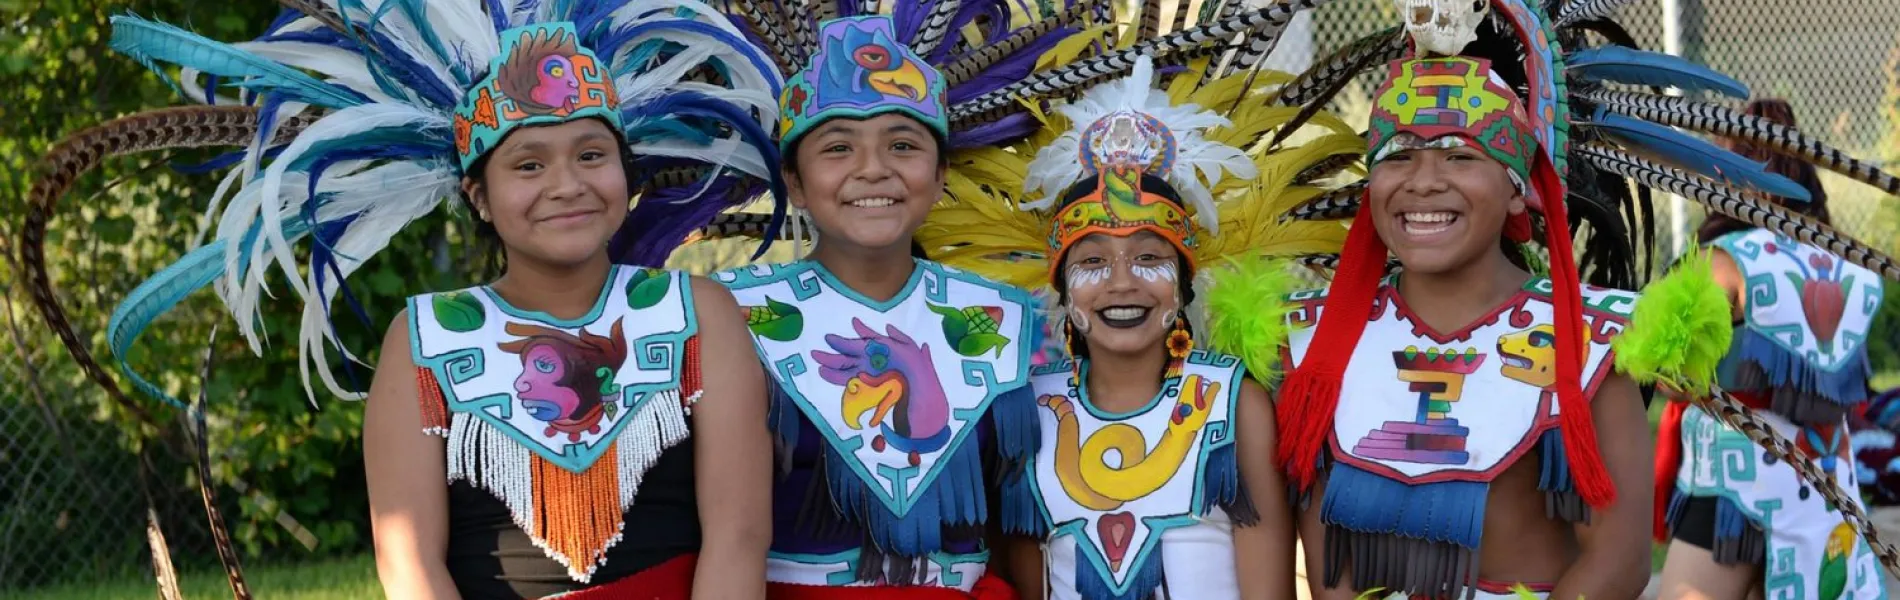 four smiling young kids dressed in colorful attire